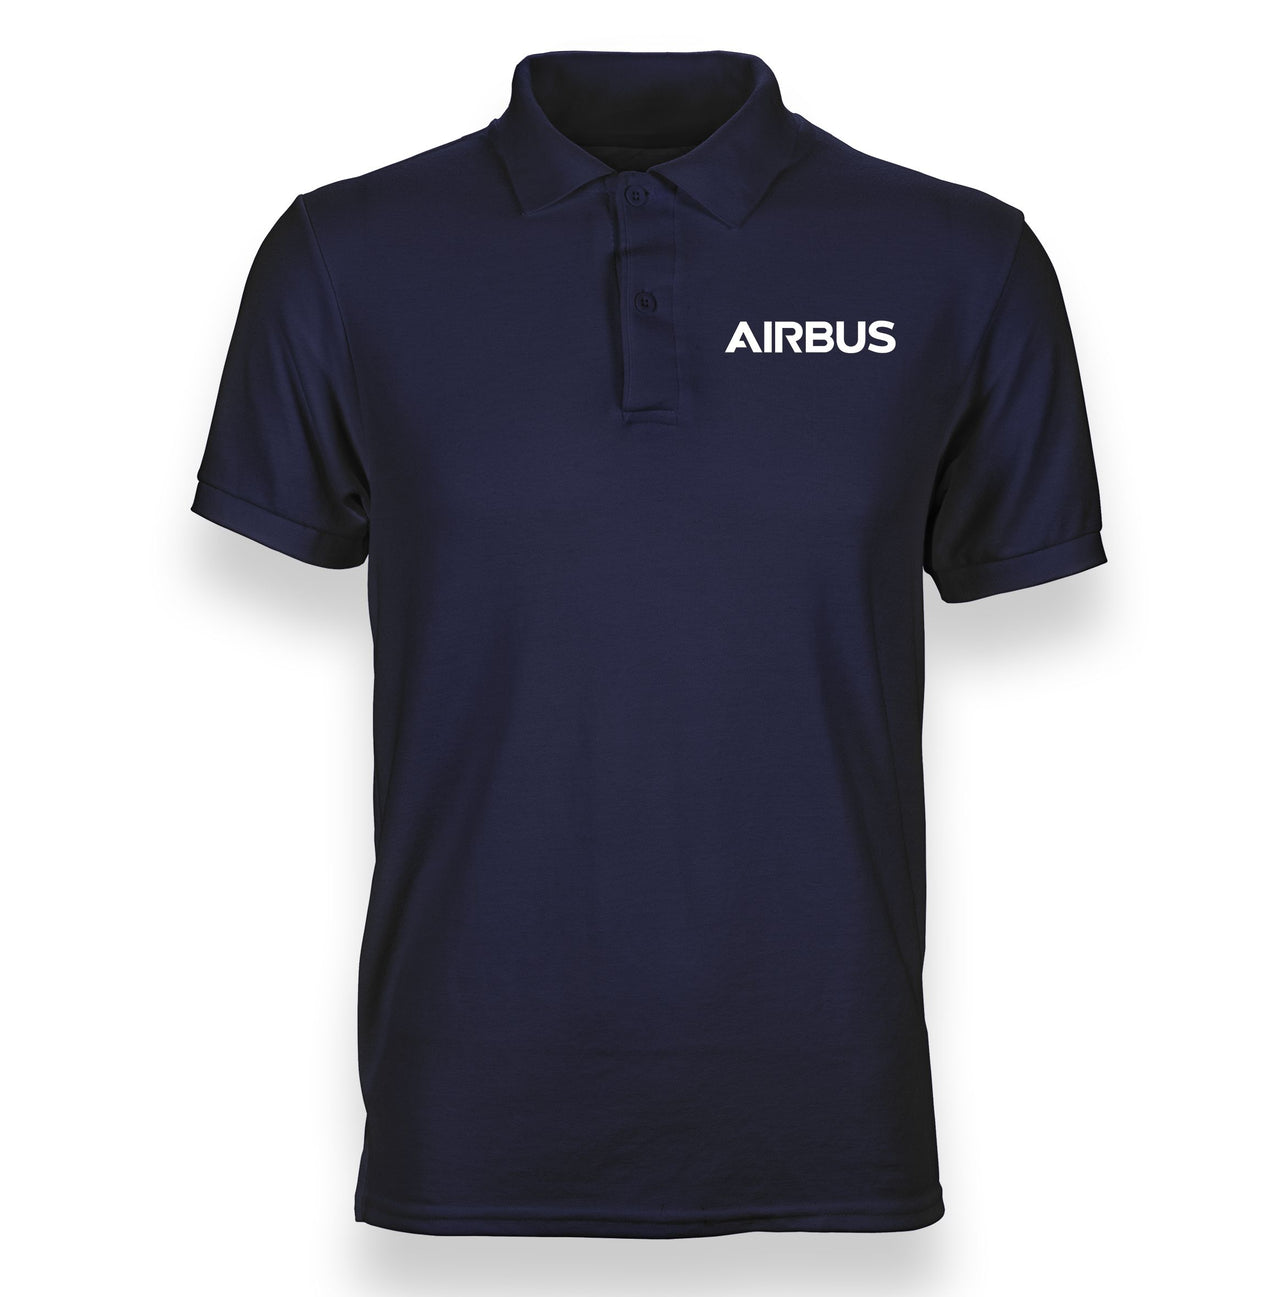 Airbus & Text Designed Polo T-Shirts